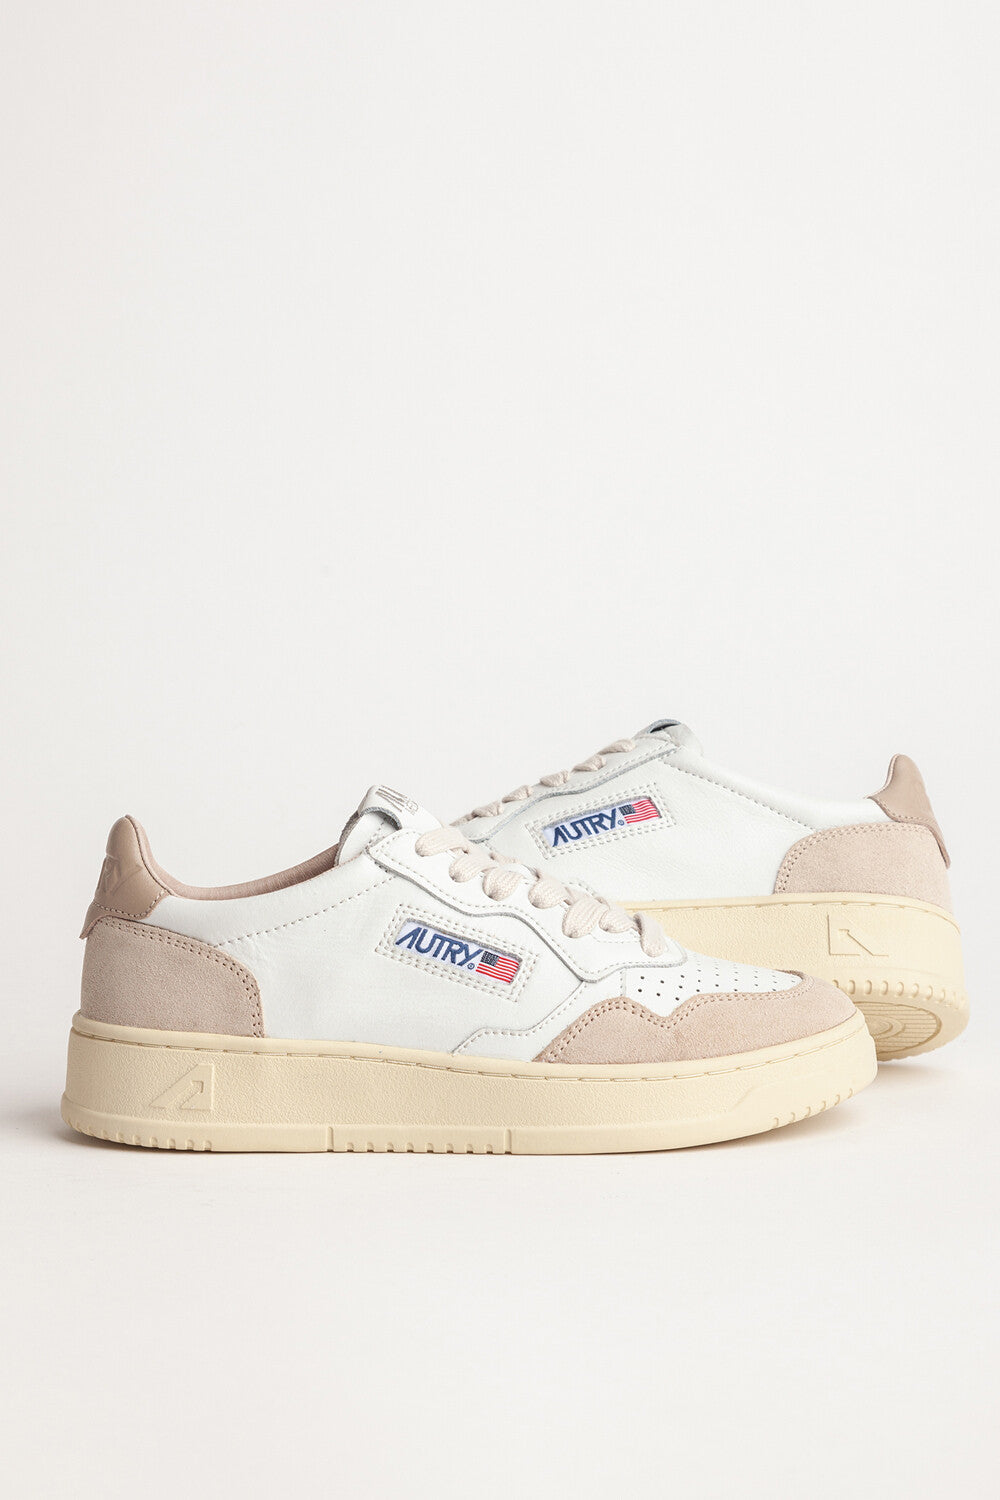 AUTRY 01 Low / Suede White Pepper